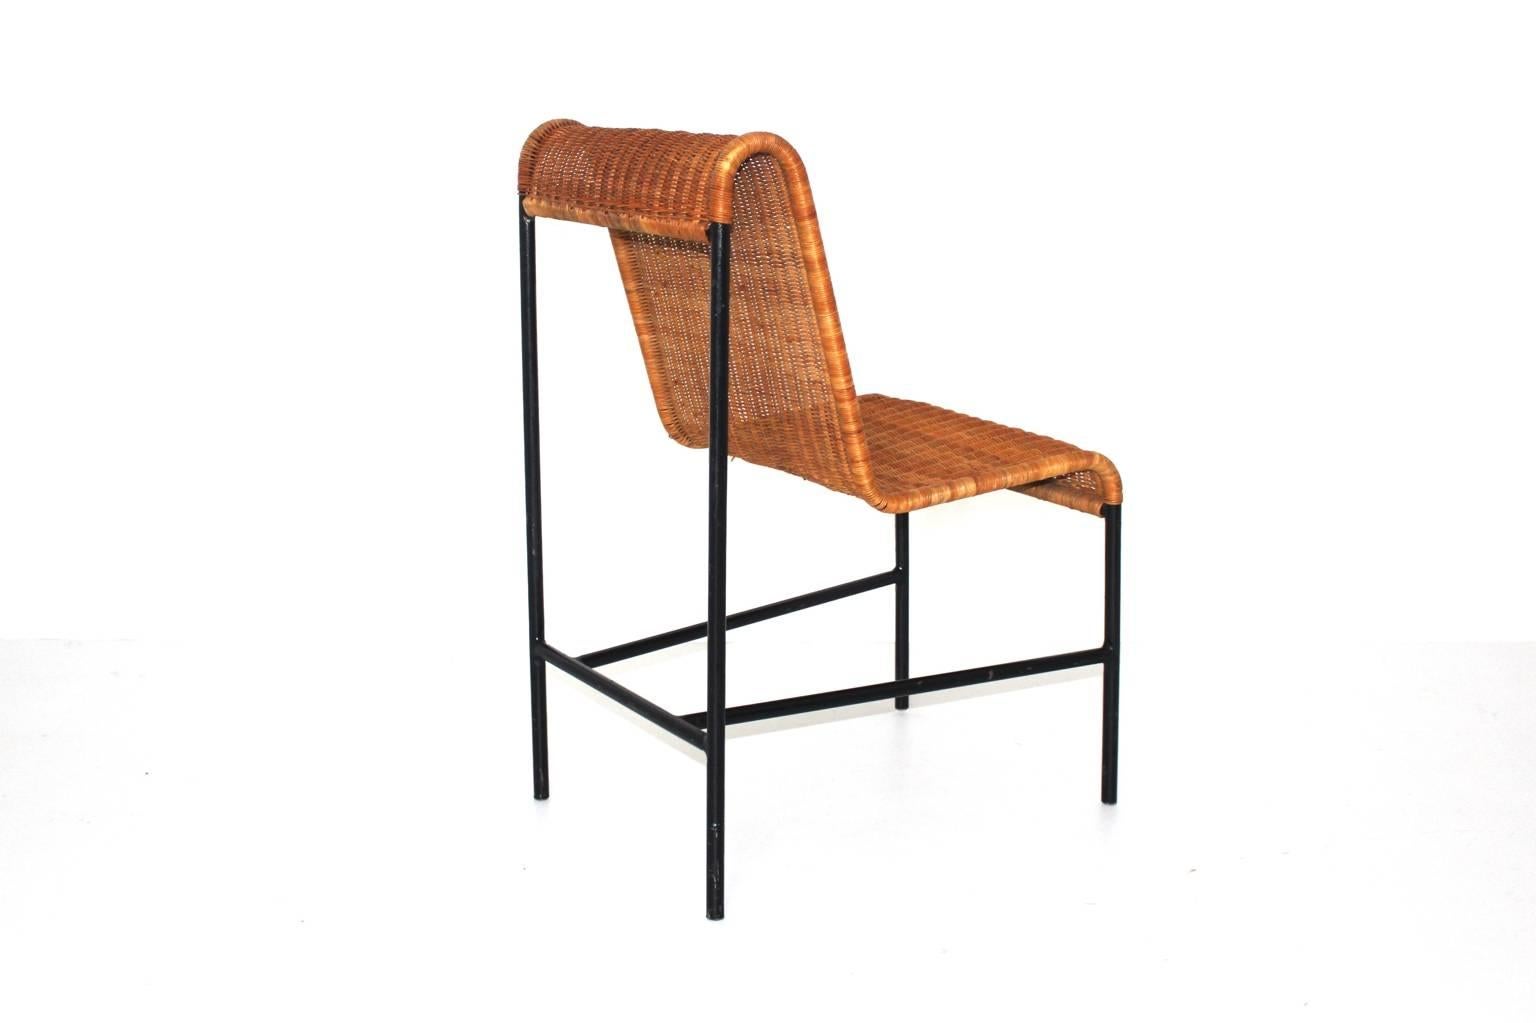 Lacquered Mid-Century Modern Chair by Harold Cohen and Davis Pratt, USA, 1953 Rattan Metal For Sale